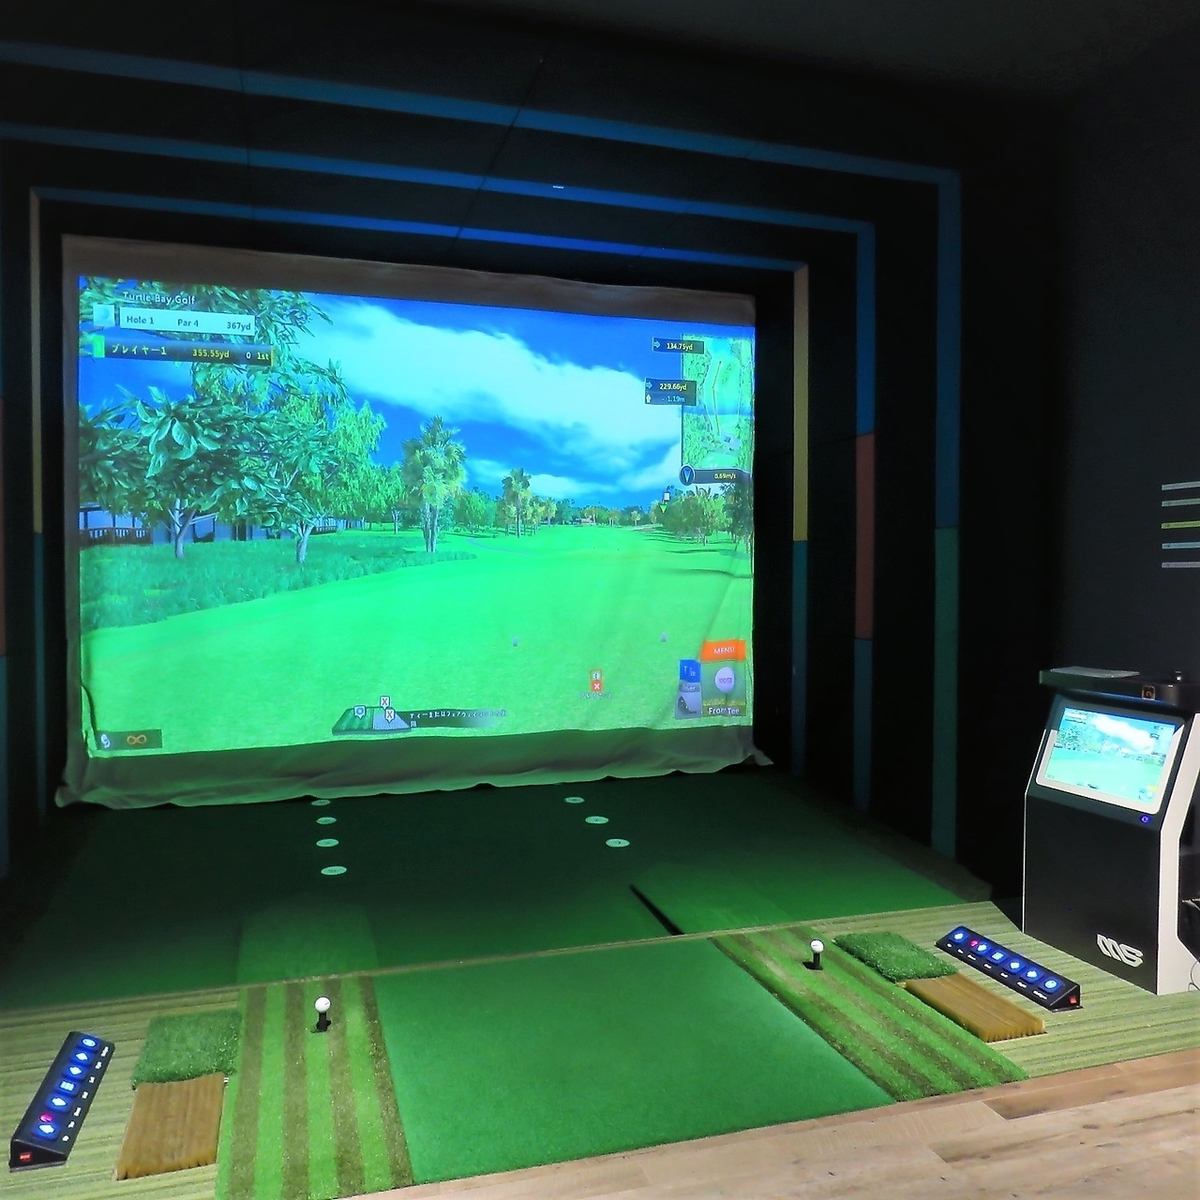 You can enjoy full-fledged golf regardless of the weather with a state-of-the-art golf simulator.